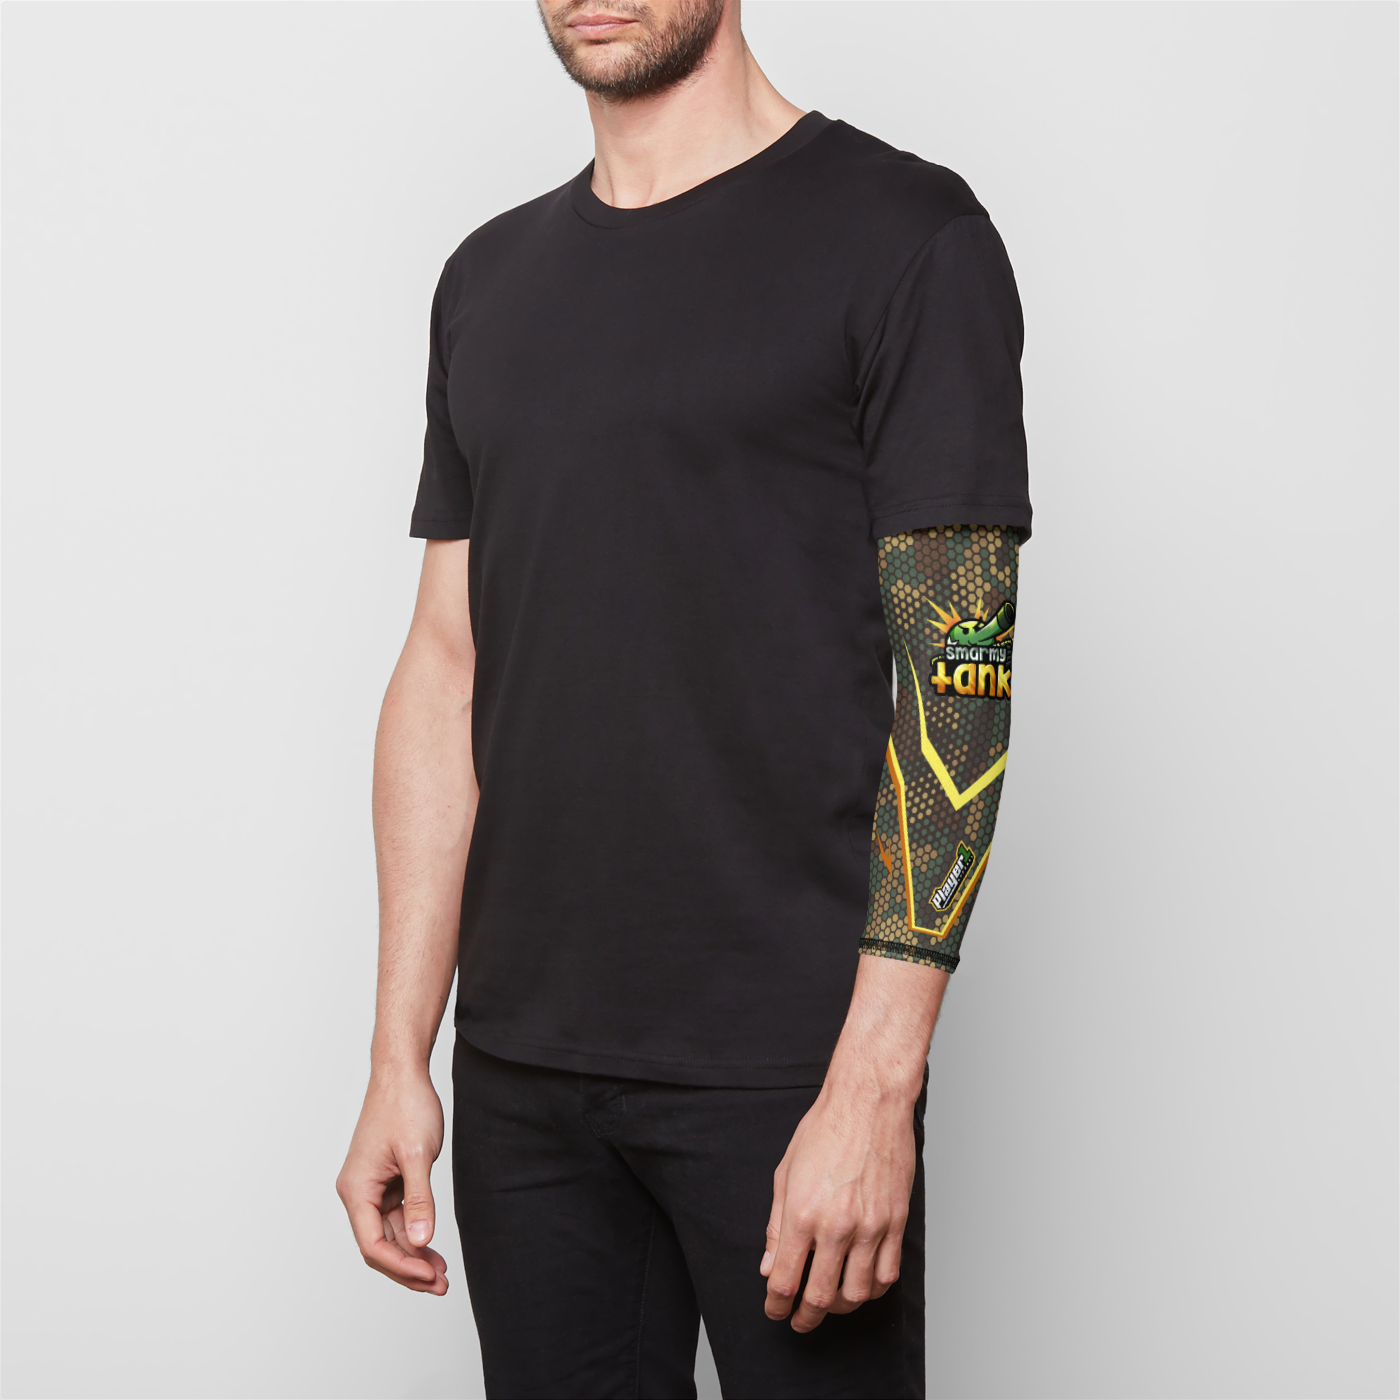 Smarmy Tank Compression Gaming Sleeve